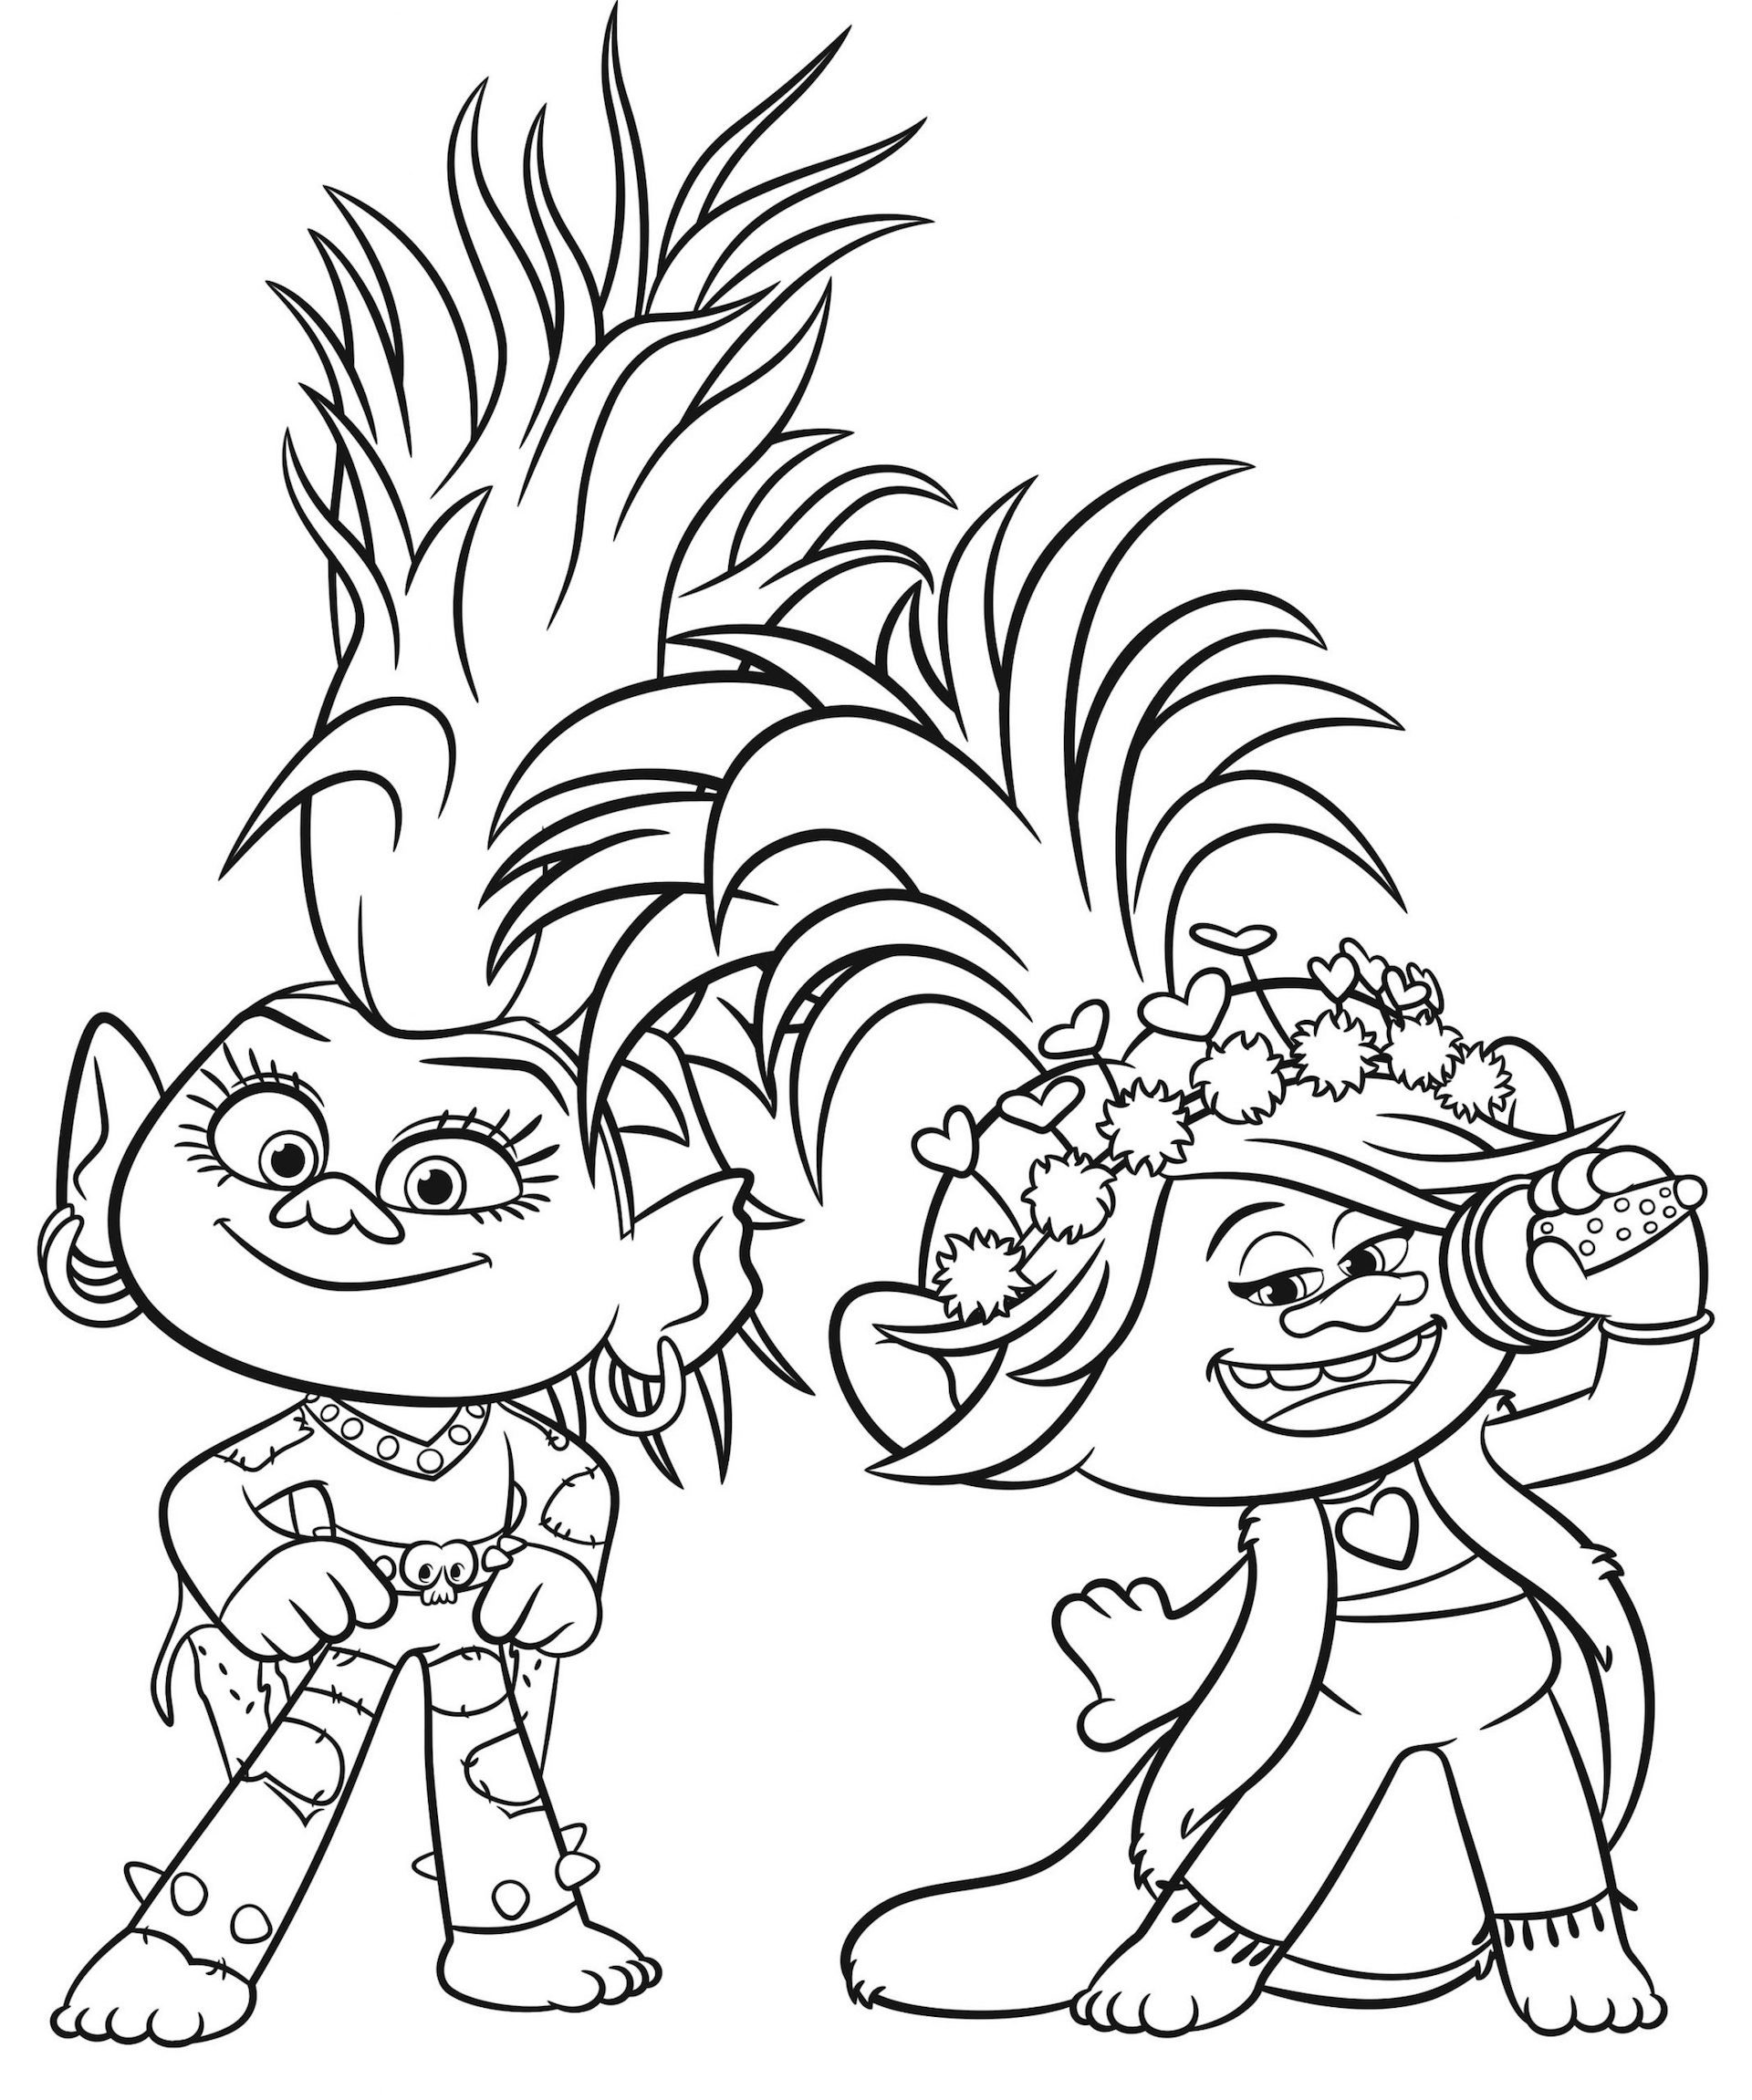 Trolls 2 Coloring Pages & book for kids Best Trolls Coloring pages